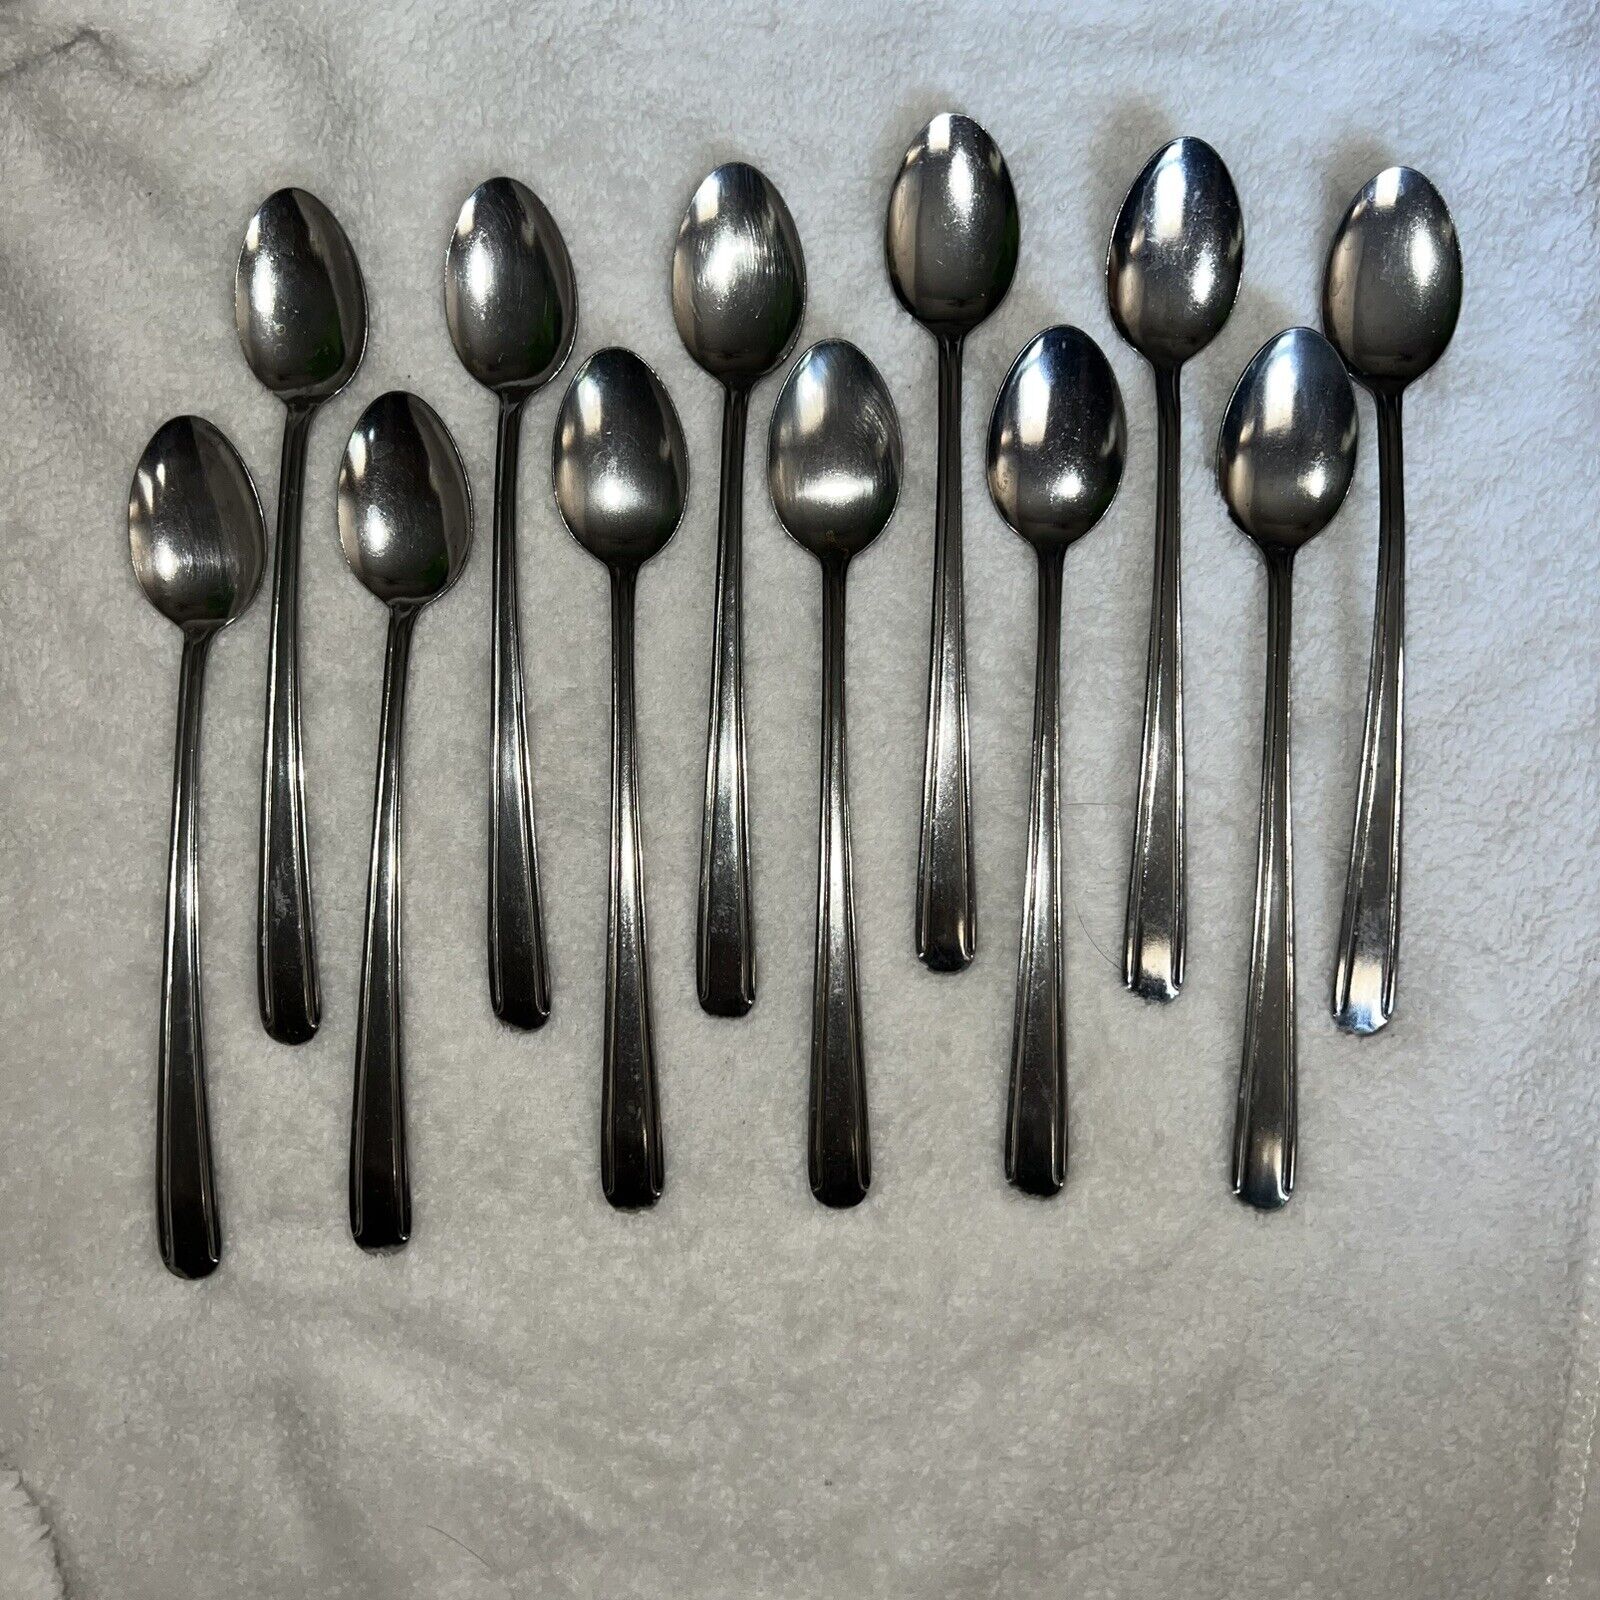 12 Pc Lot Of Vintage Stainless Japan Iced Tea Spoon Long Spoons